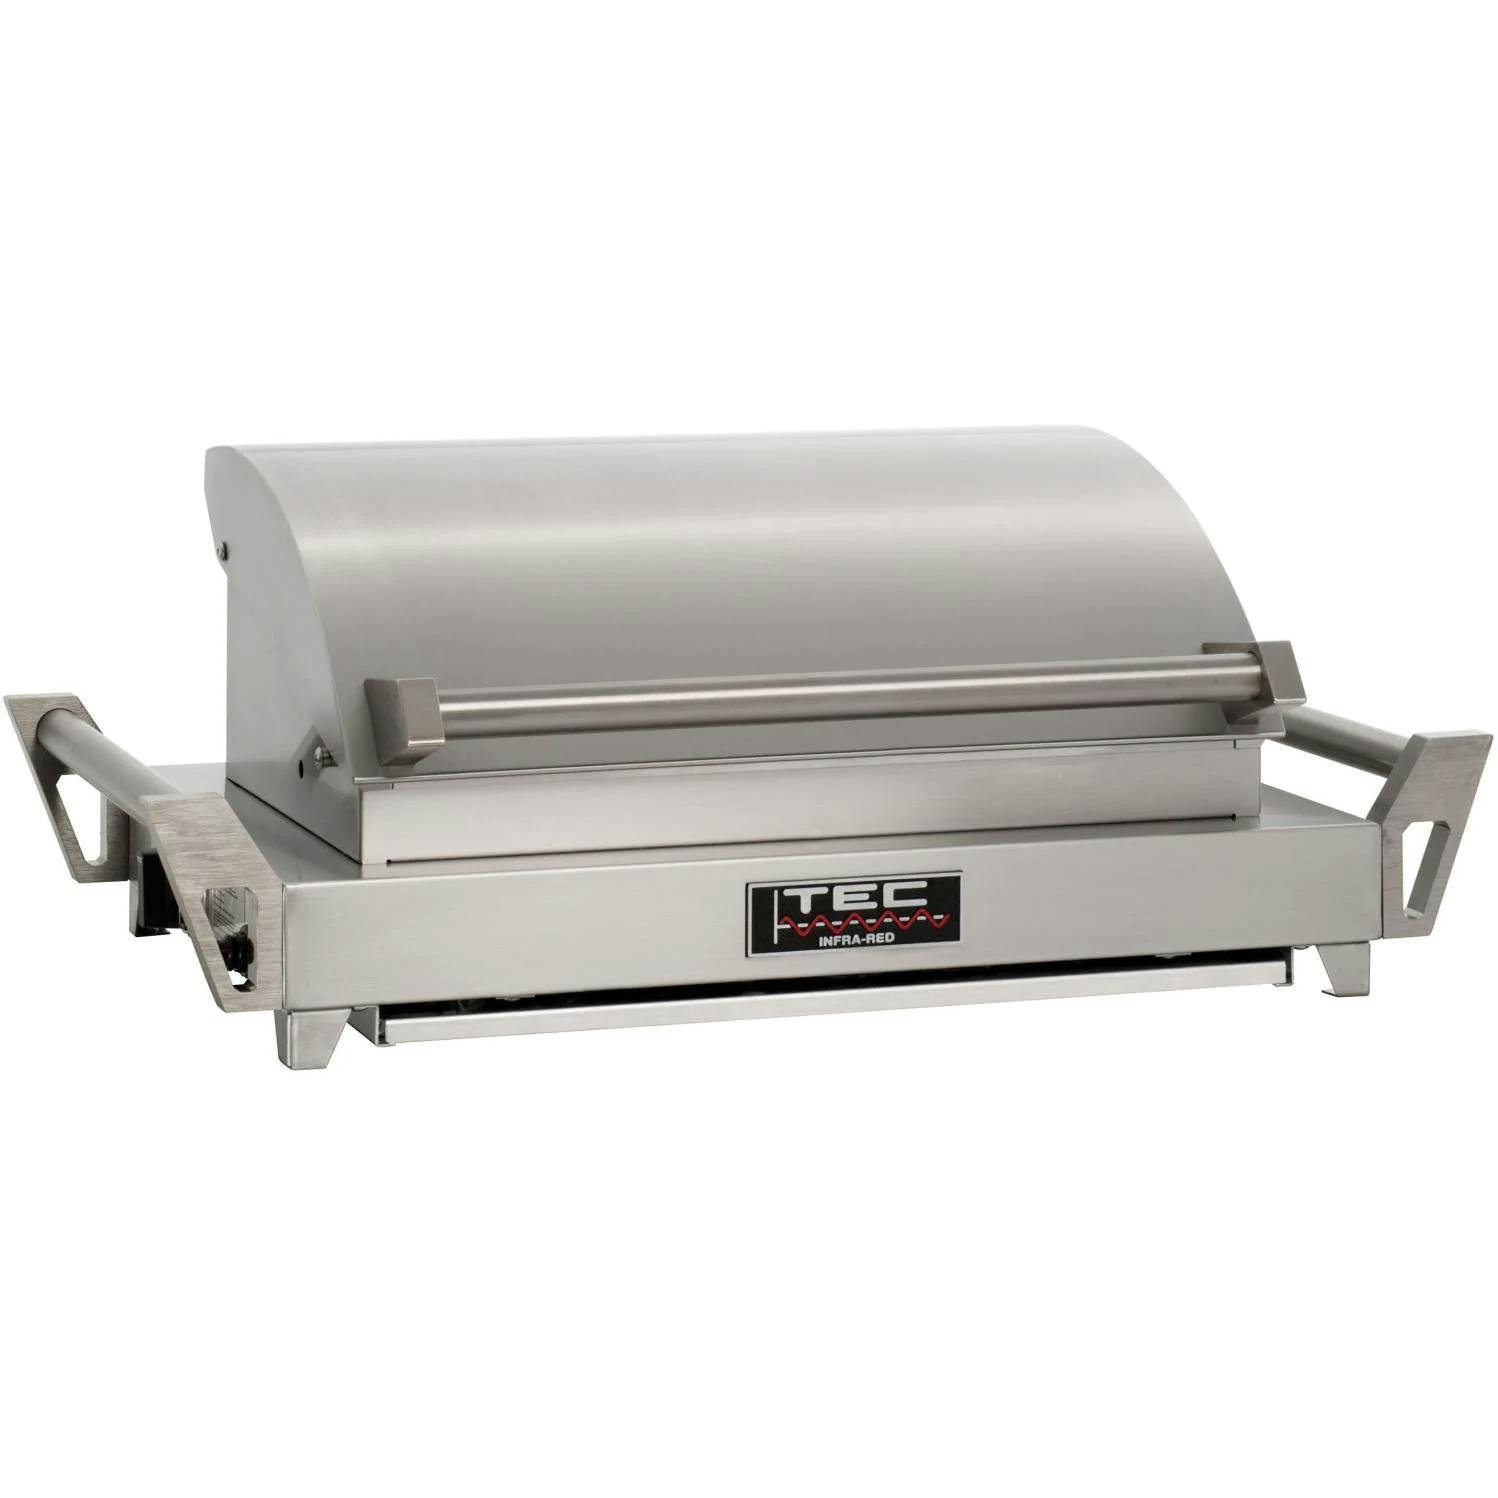 TEC G-Sport FR Portable Infrared Gas Grill